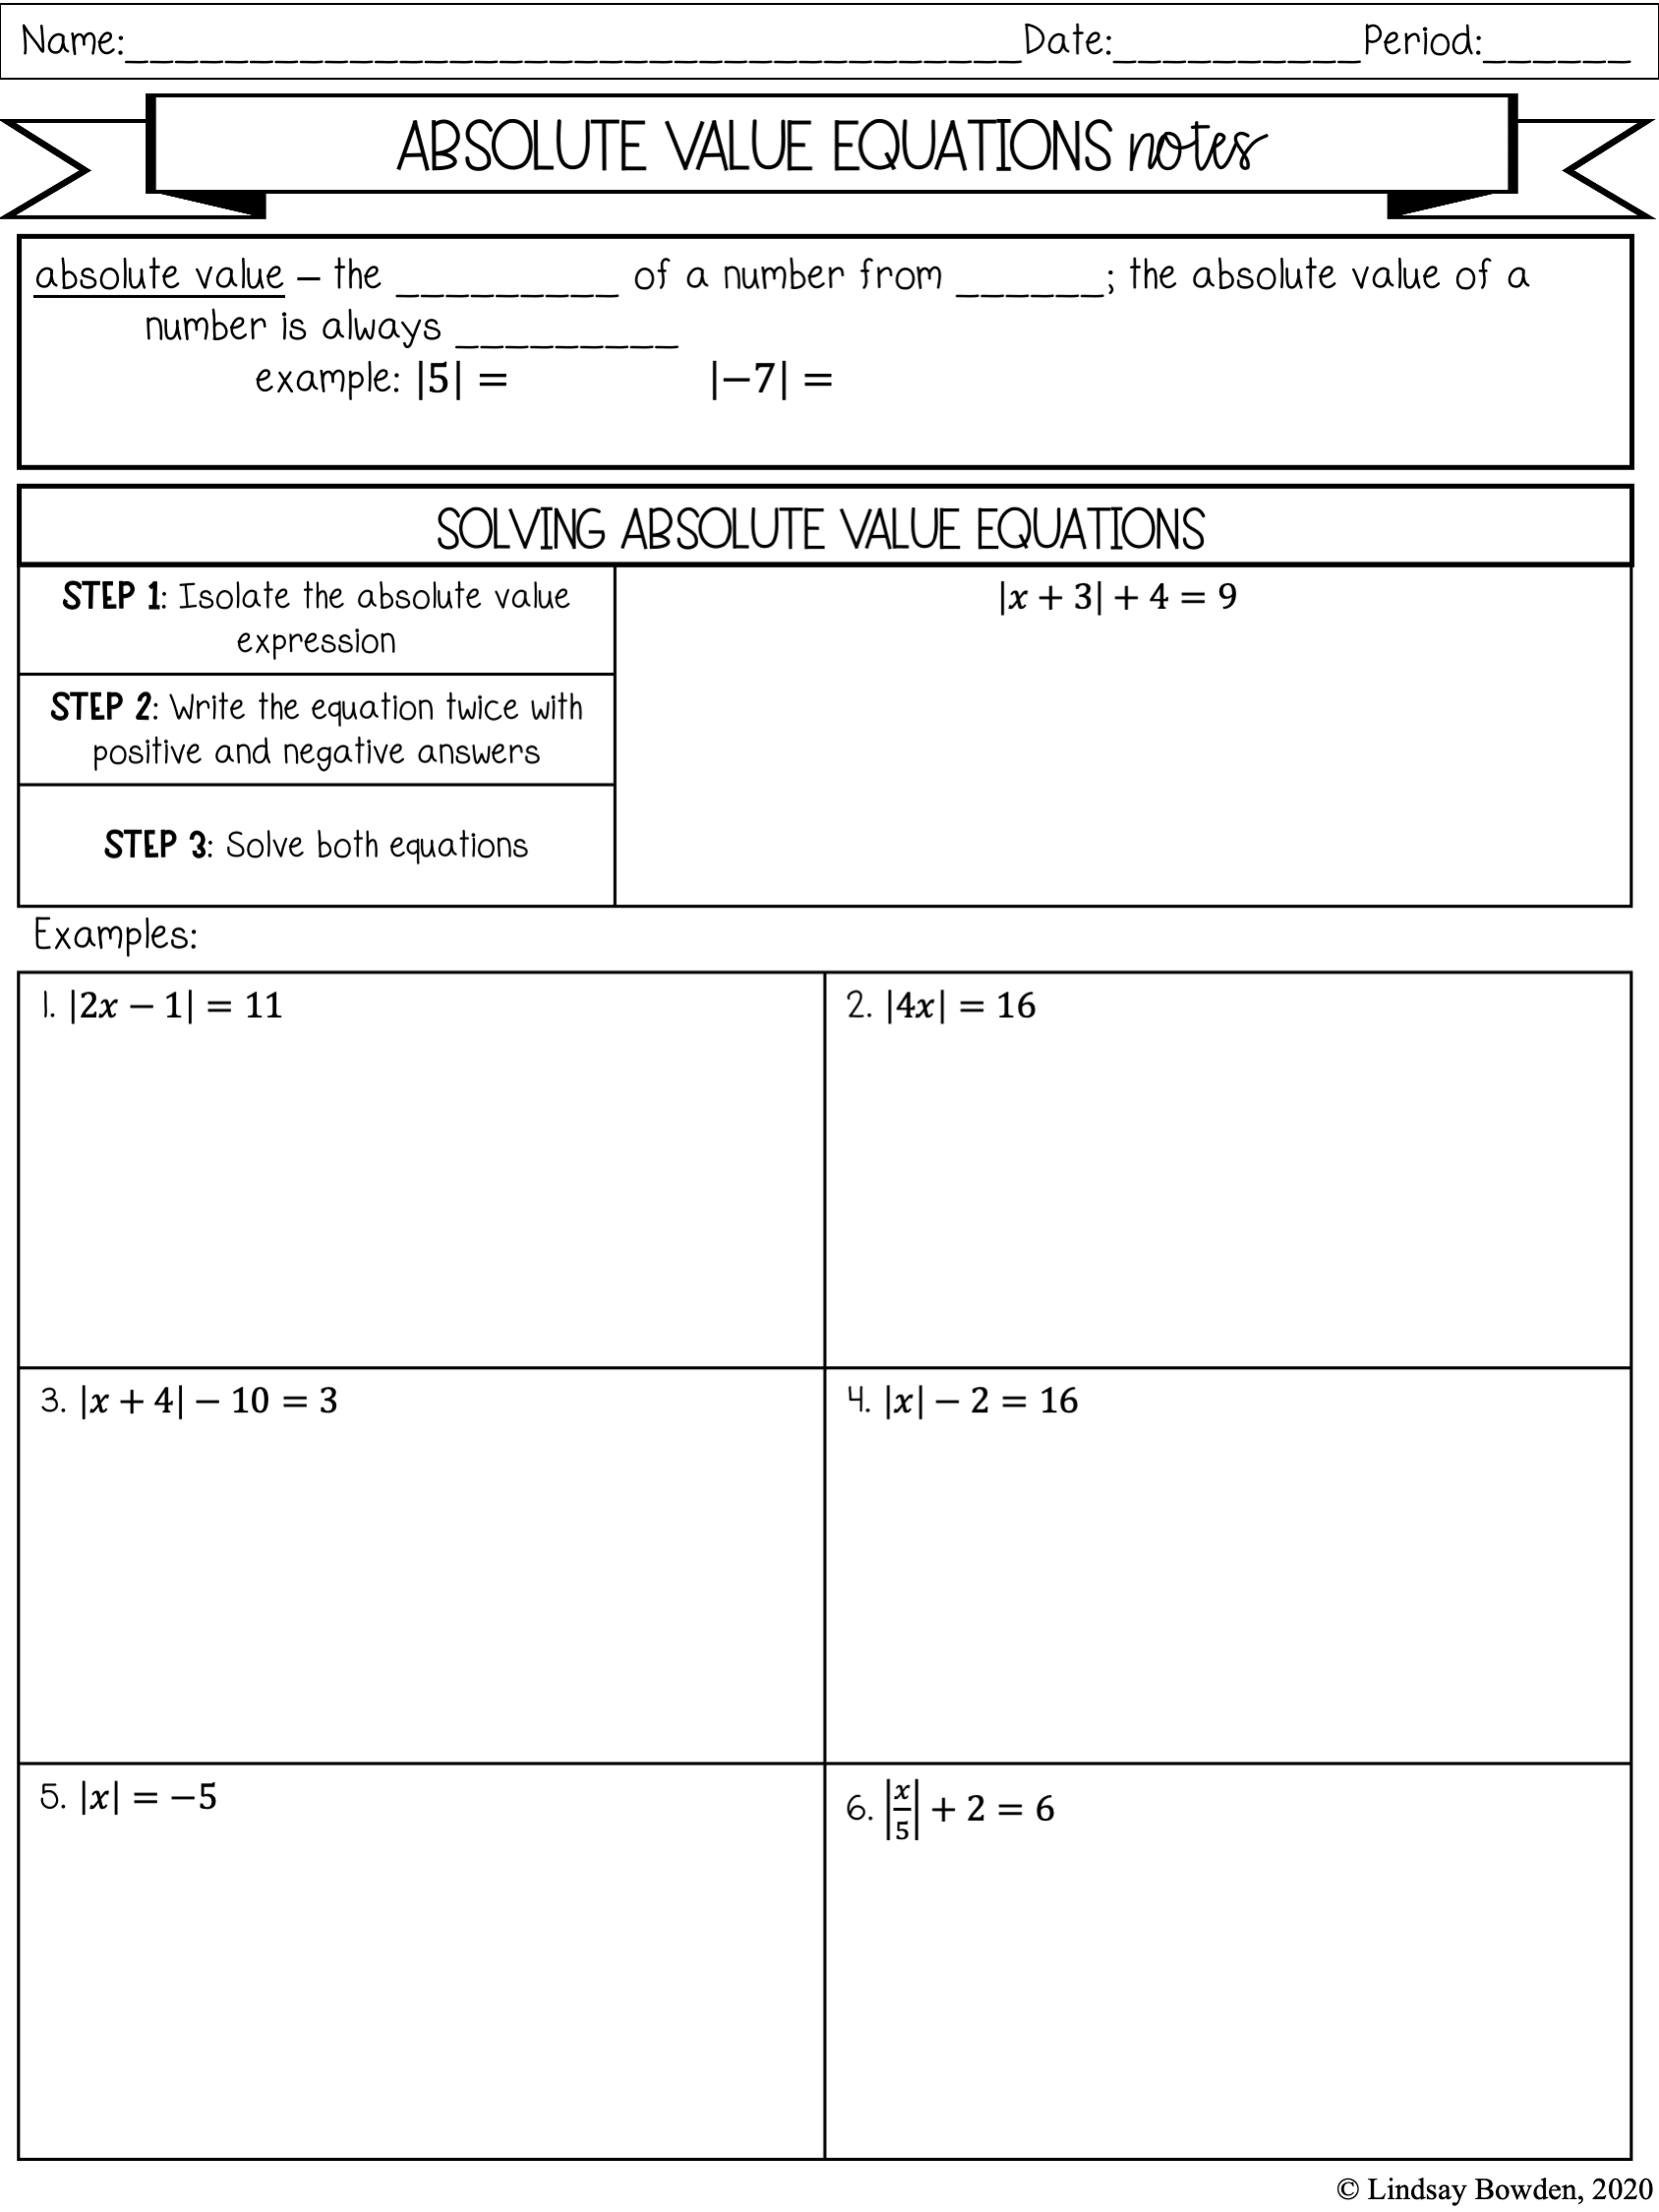 Absolute Value Notes and Worksheets - Lindsay Bowden Intended For Solving Absolute Value Equations Worksheet